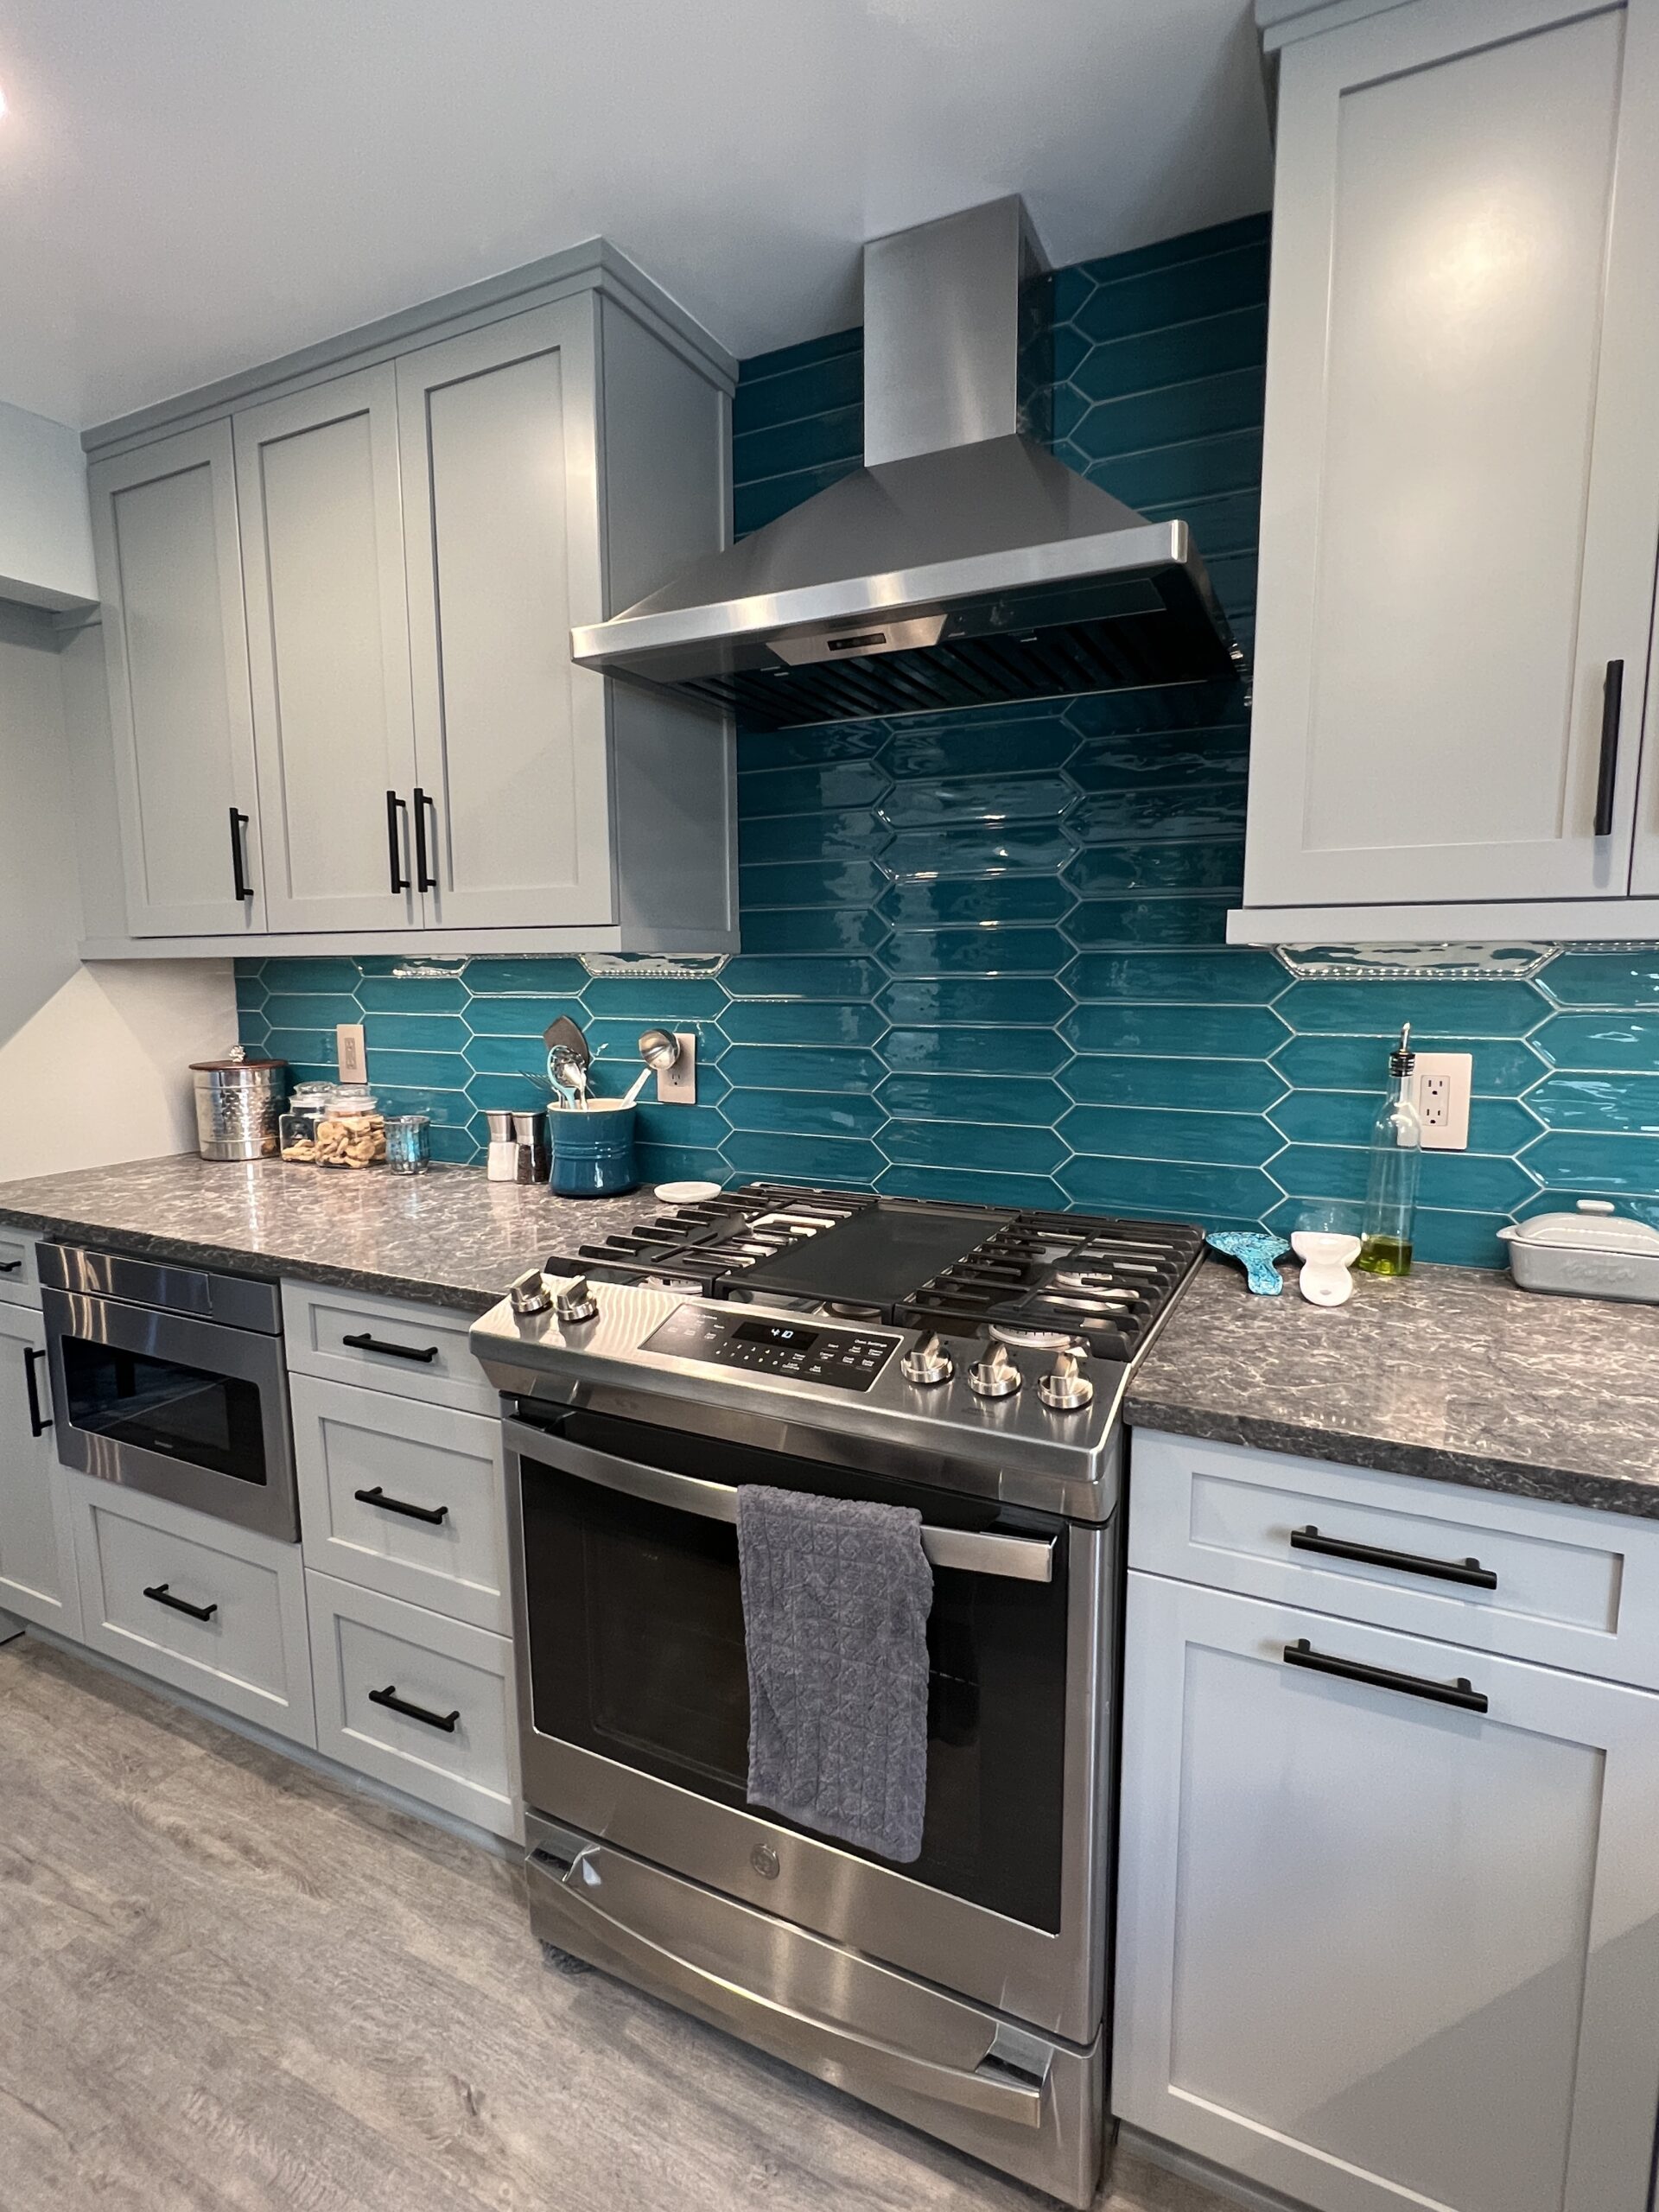 Classic full kitchen remodel, blue teal tiles, grey stove, little grey marble island, storage cabinets, spacious counter